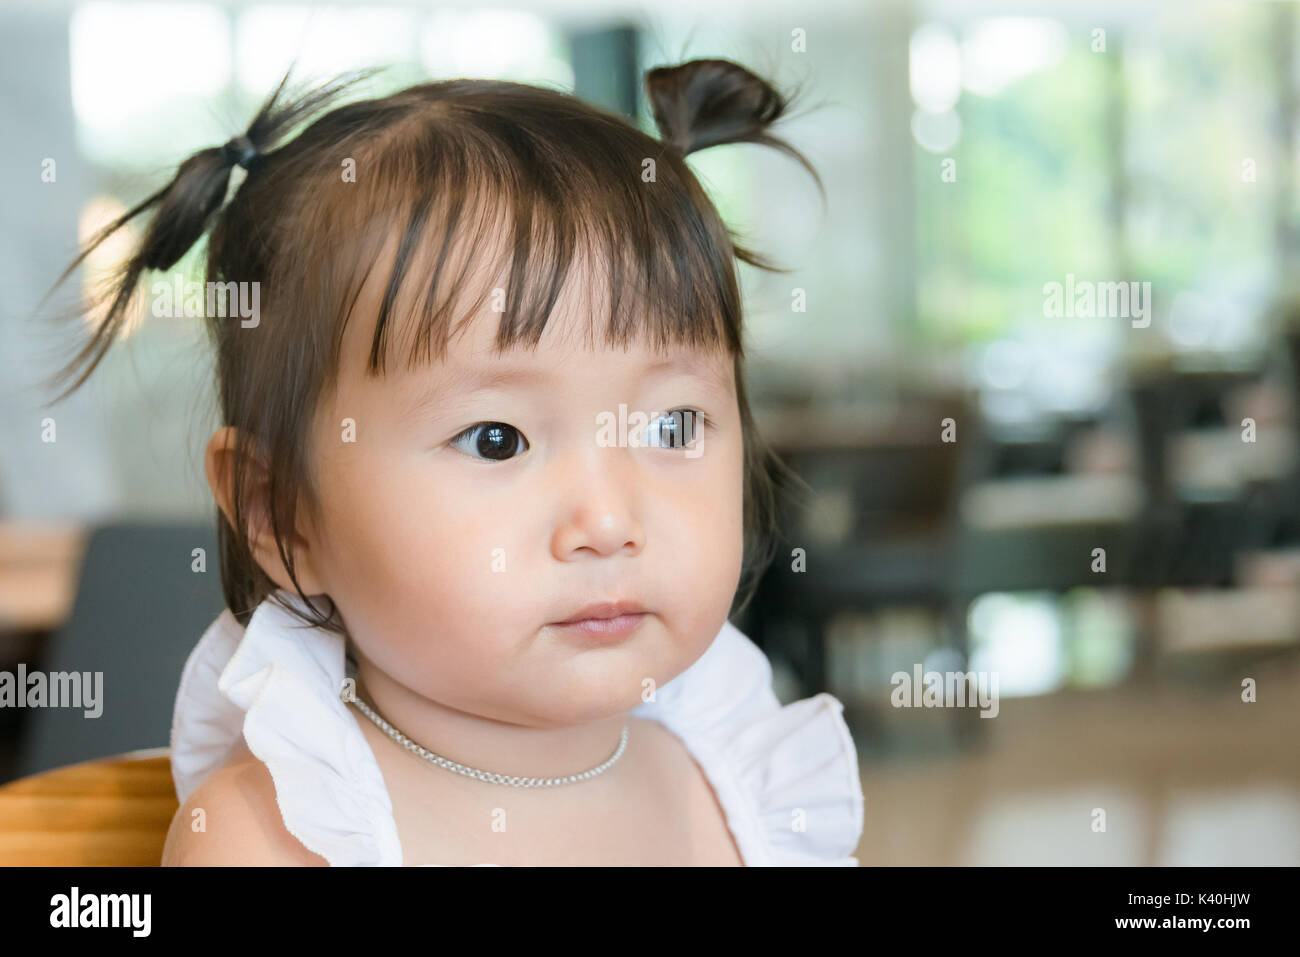 Portrait of 2 year old little girl faces, Smiling face in home interior with space background Stock Photo